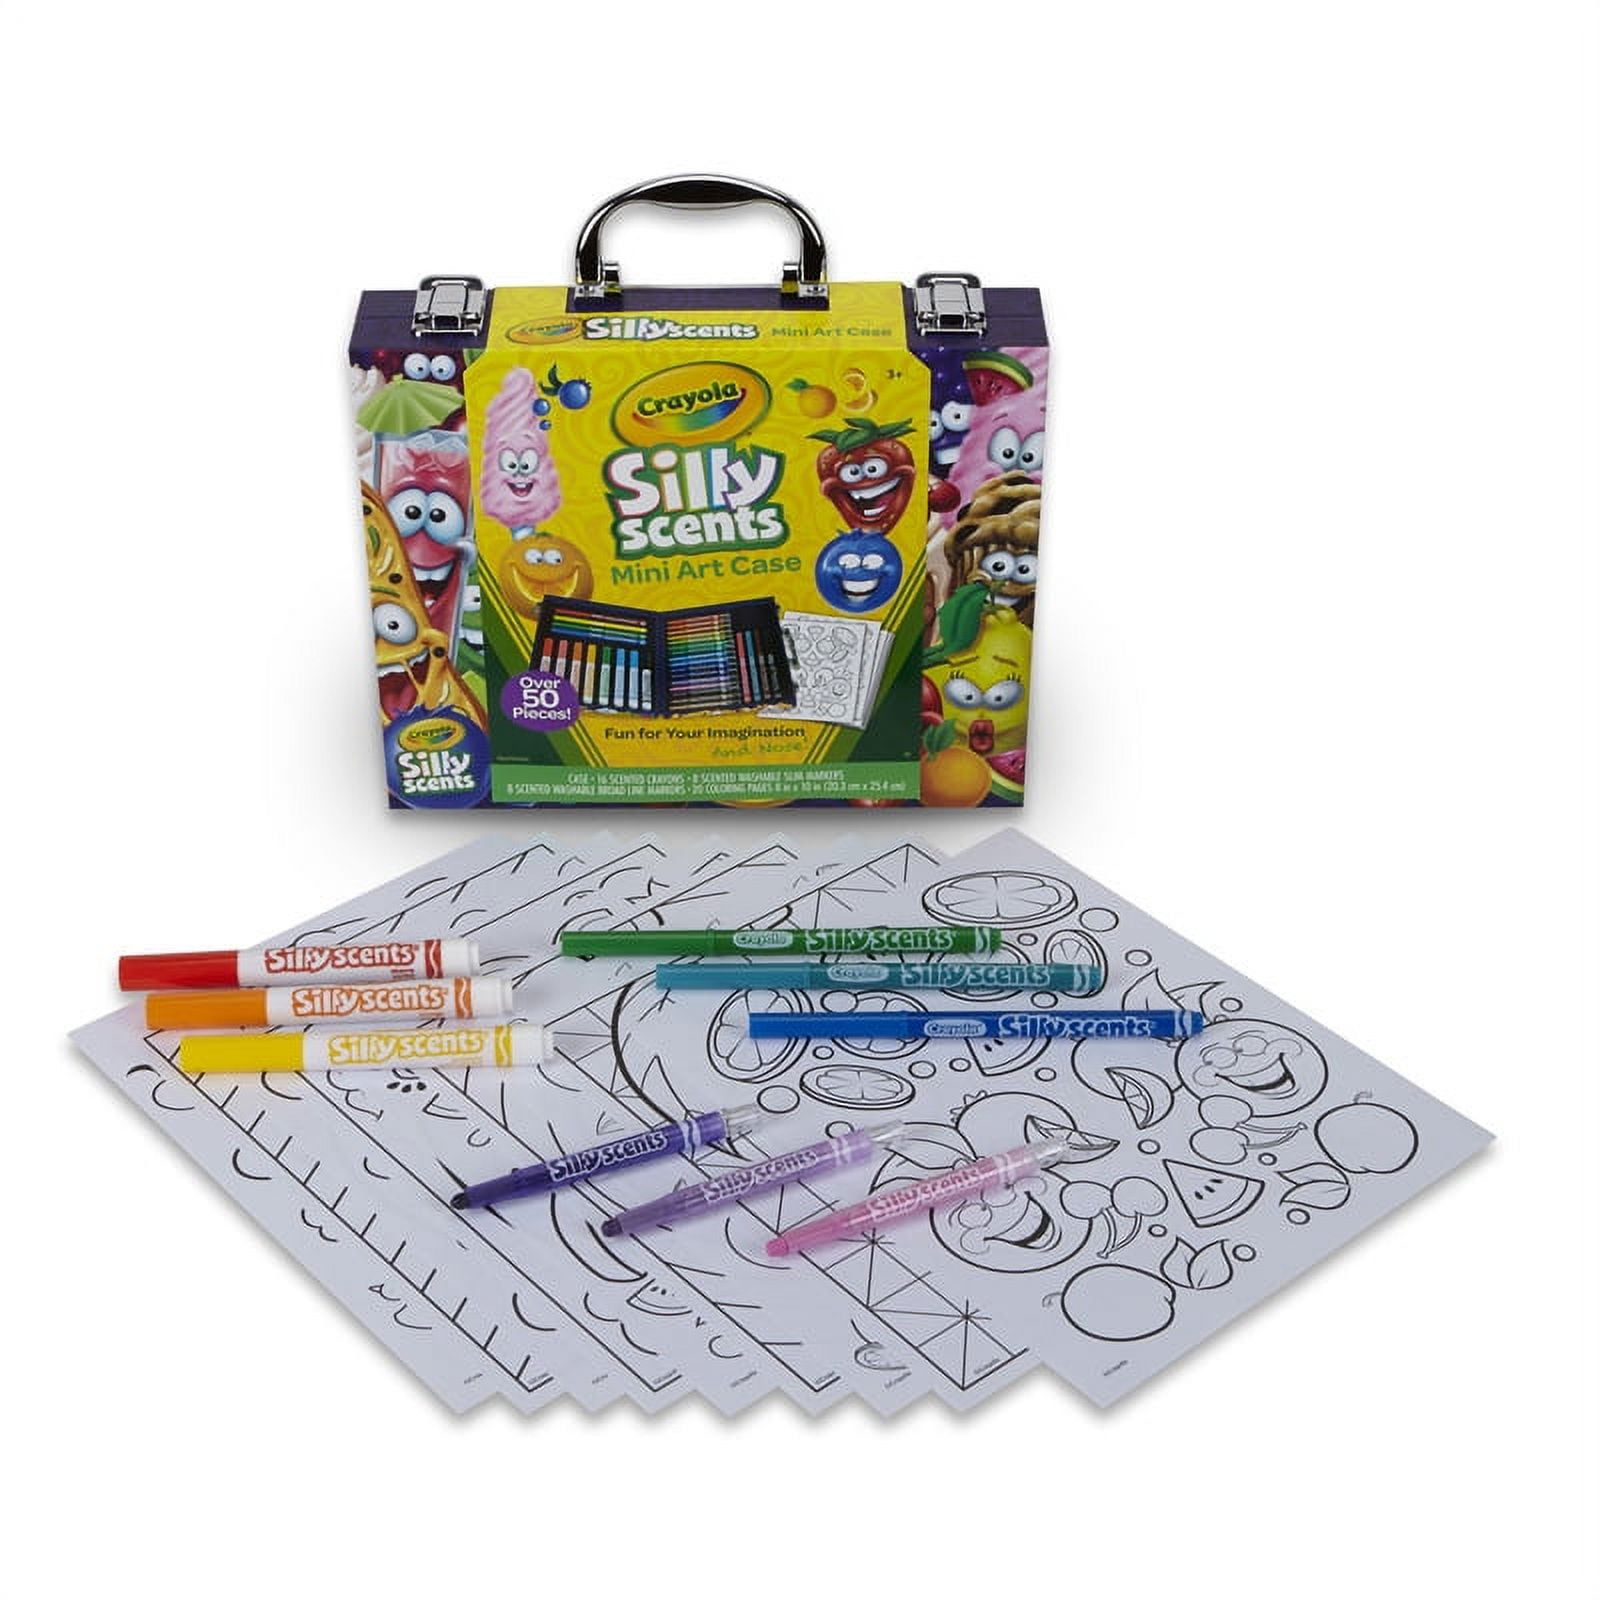 Crayola® Silly Scents Mini Inspiration Art Case Coloring Set, Pack Of 52